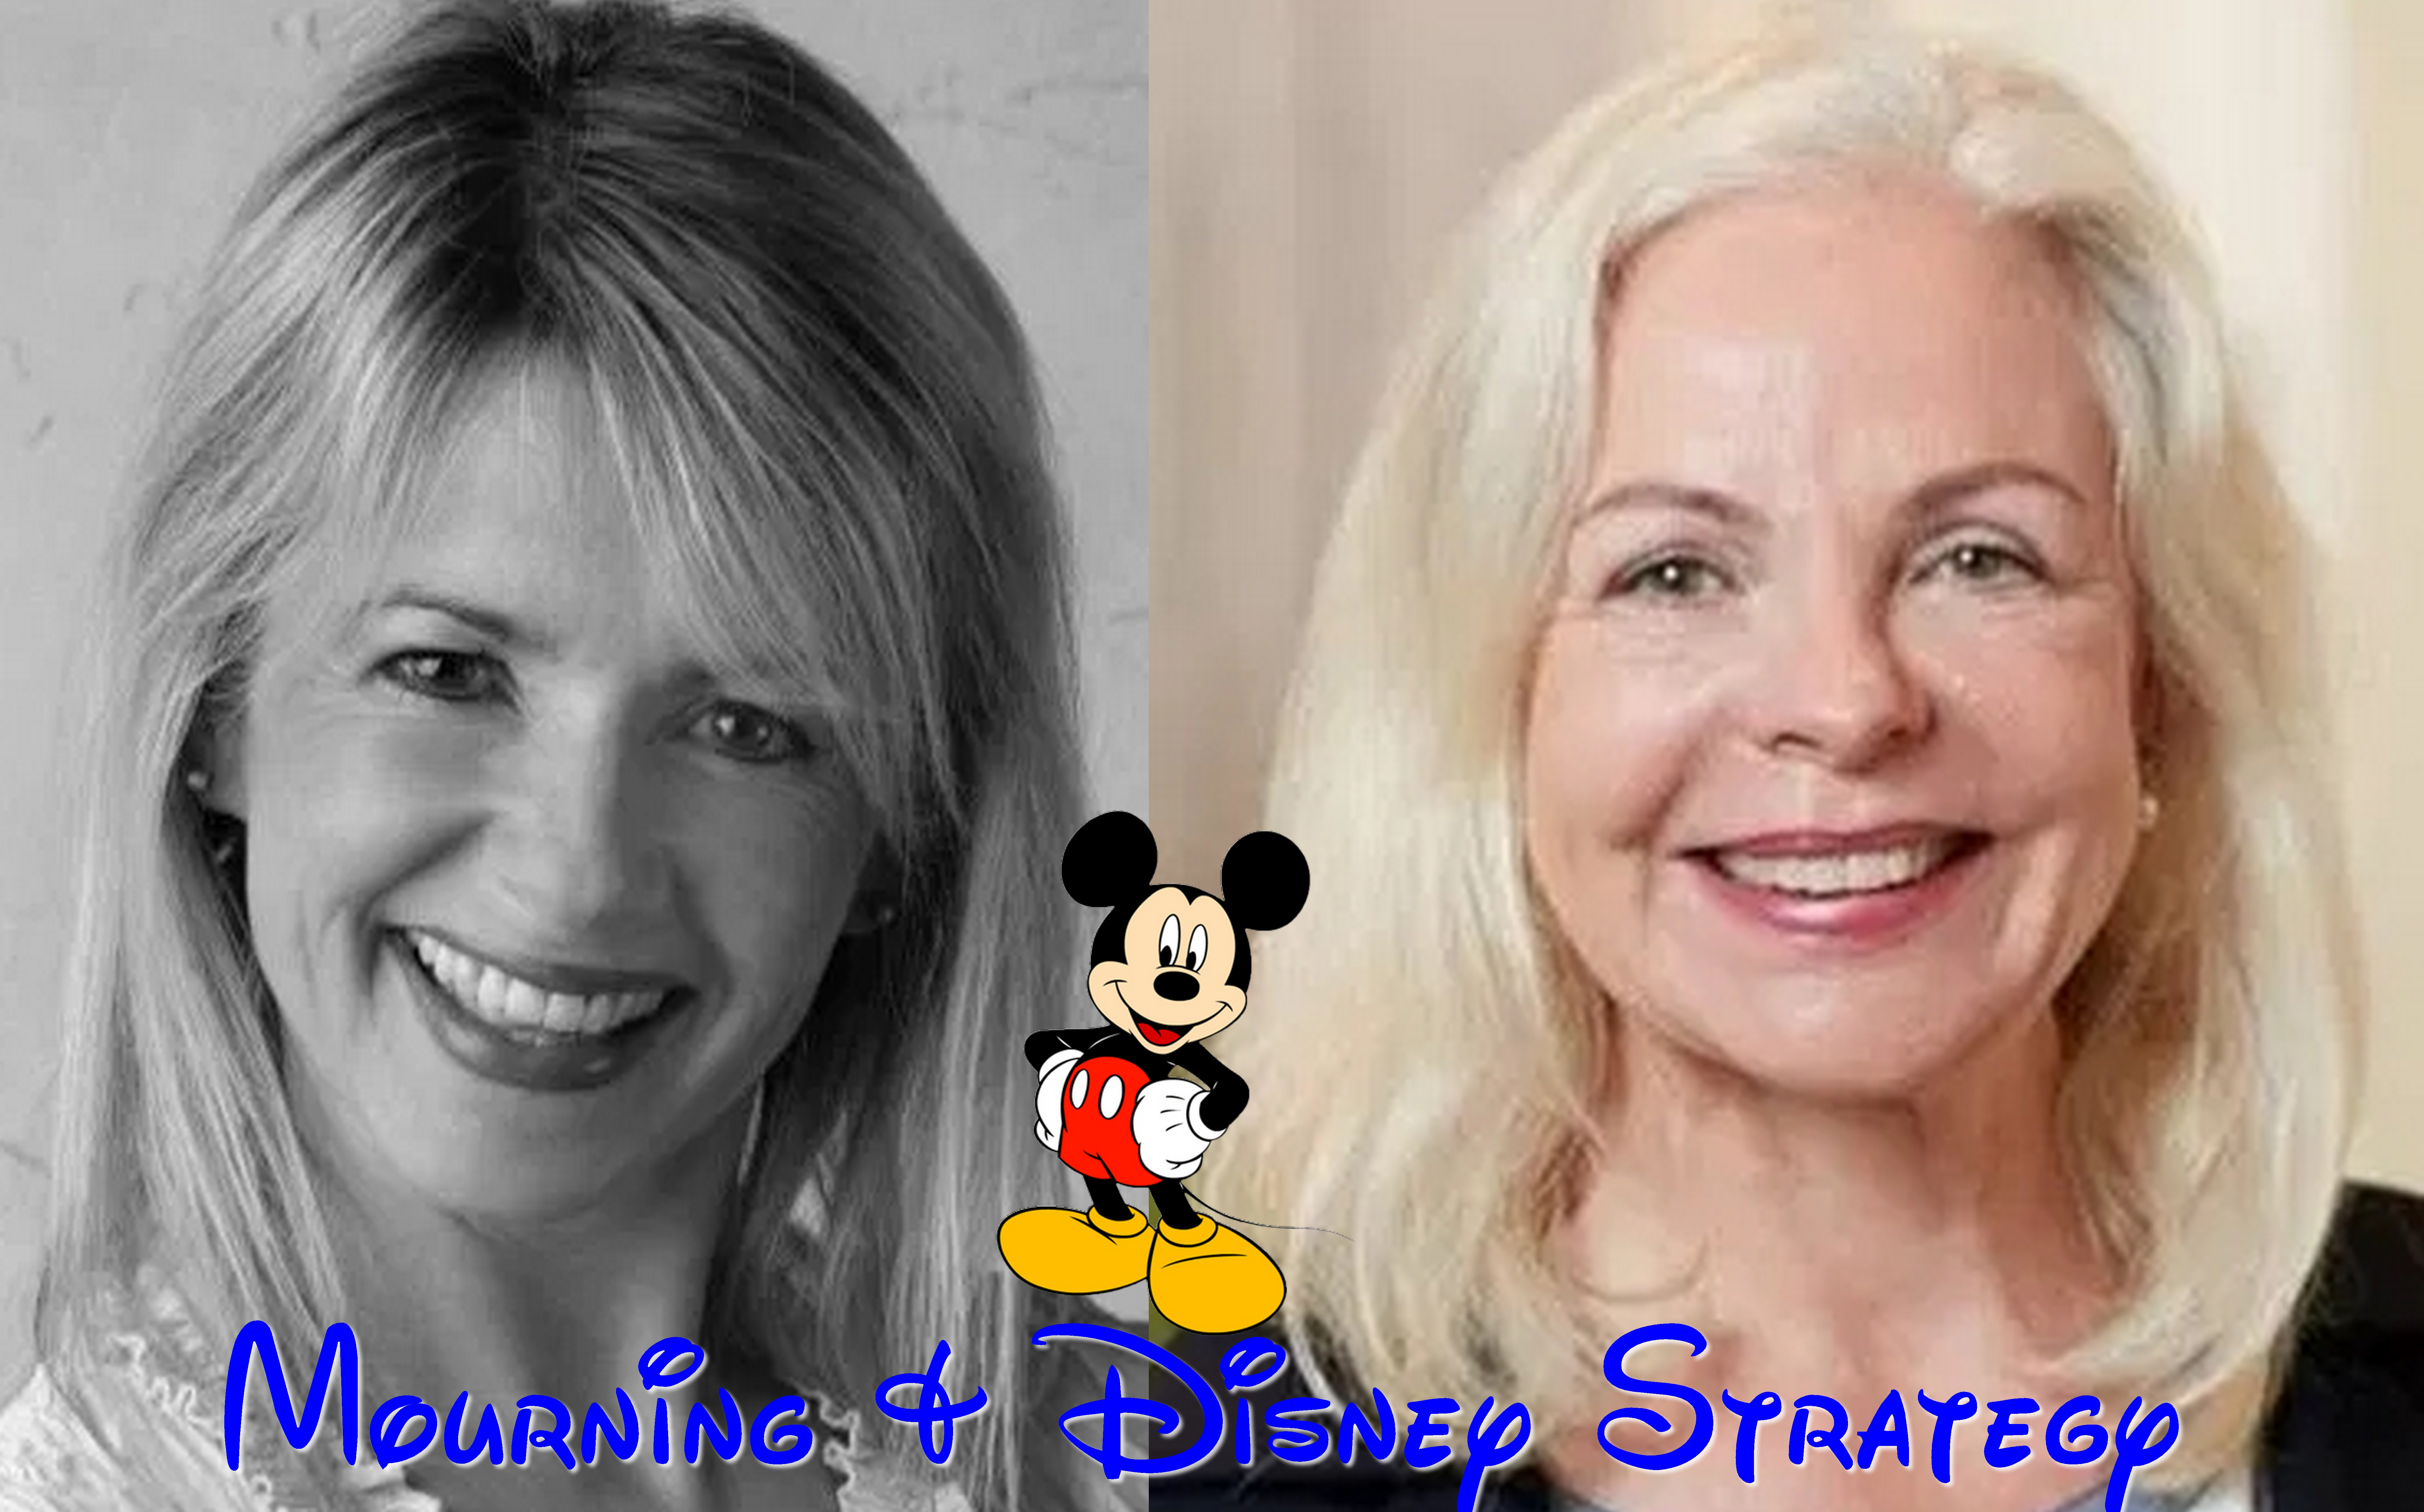 The Mourning & Disney Strategy